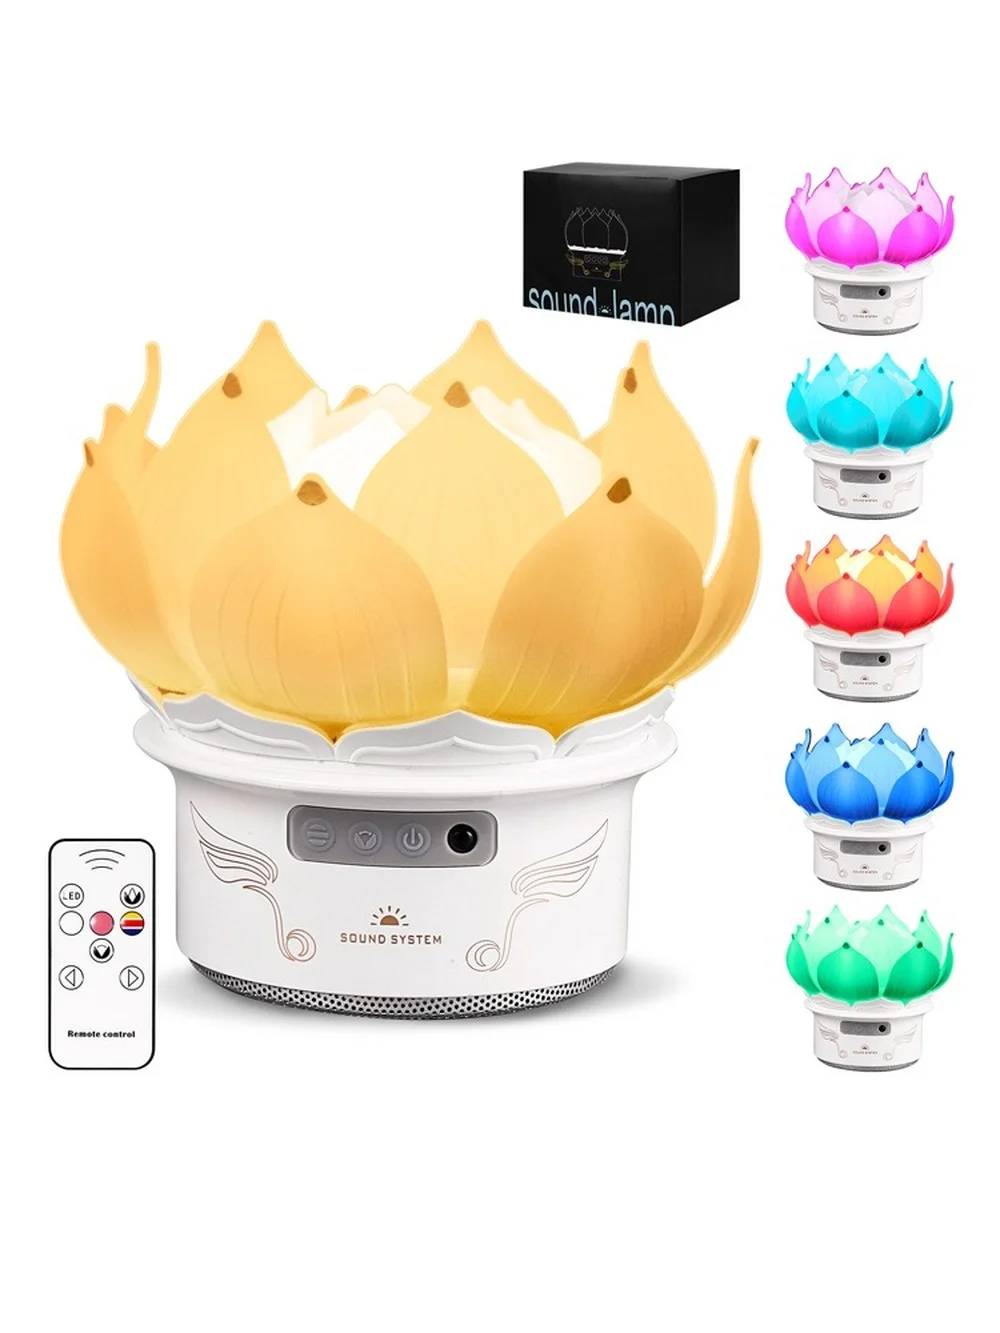 Intelligent Dynamic Bluetooth Audio Light Crystal Table Lamp Touch Night Light Lotus Colorful Charge Remote Control Lamp